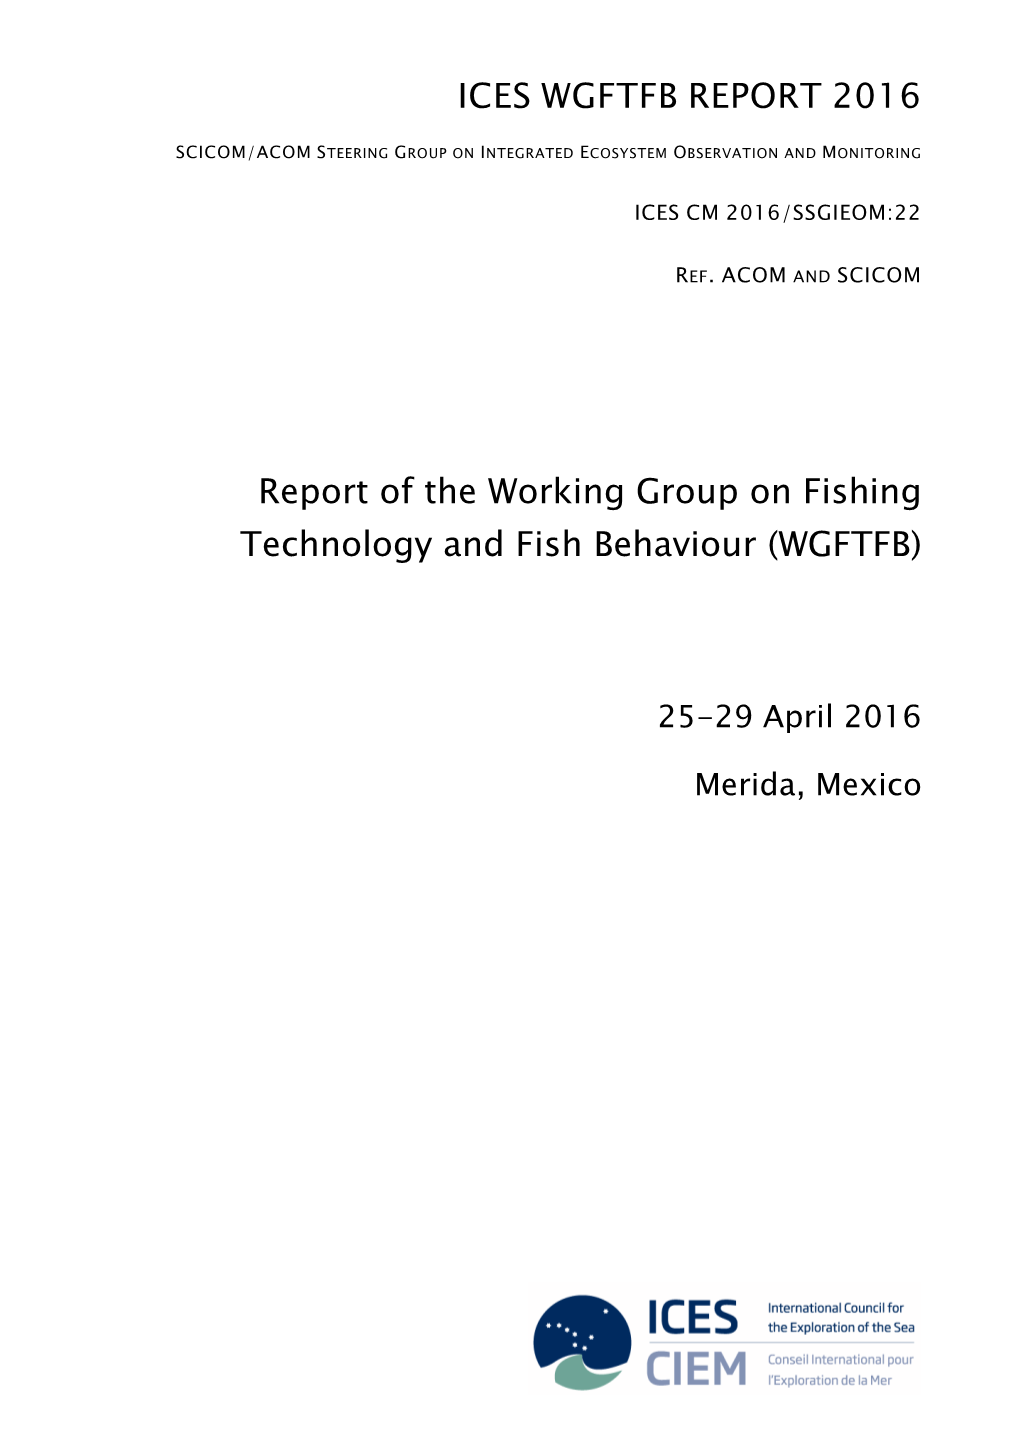 Report of the Working Group on Fish Technology and Fish